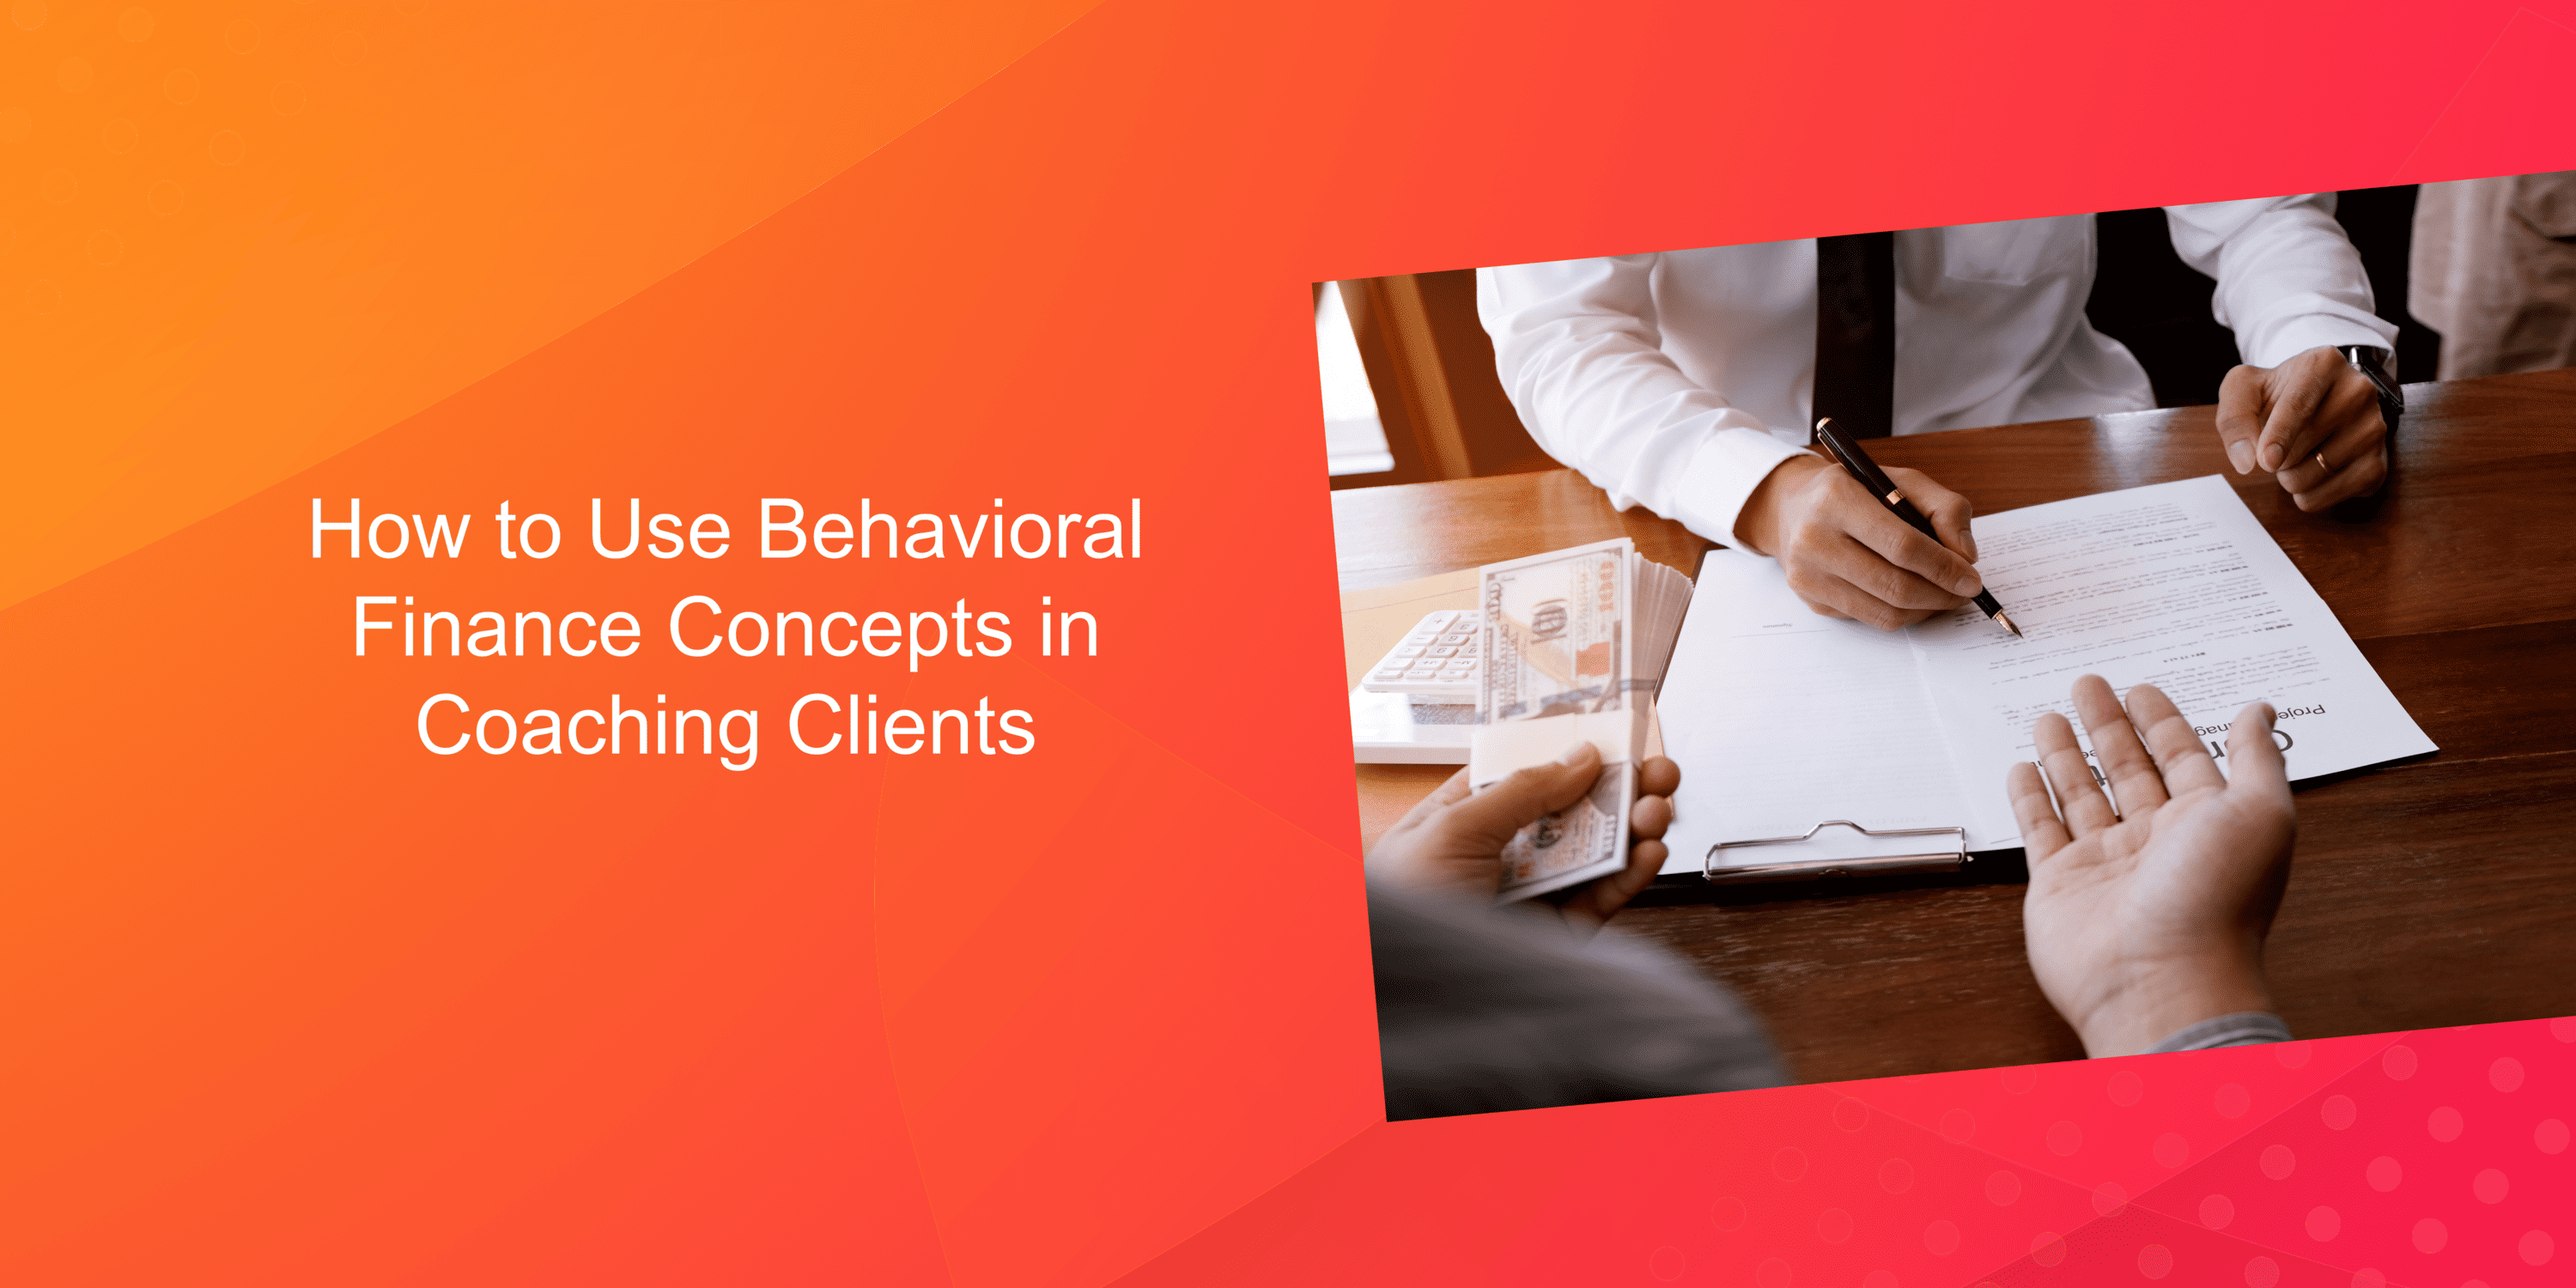 Financial Advisors - How to Use Behavioral Finance Concepts in Coaching Clients